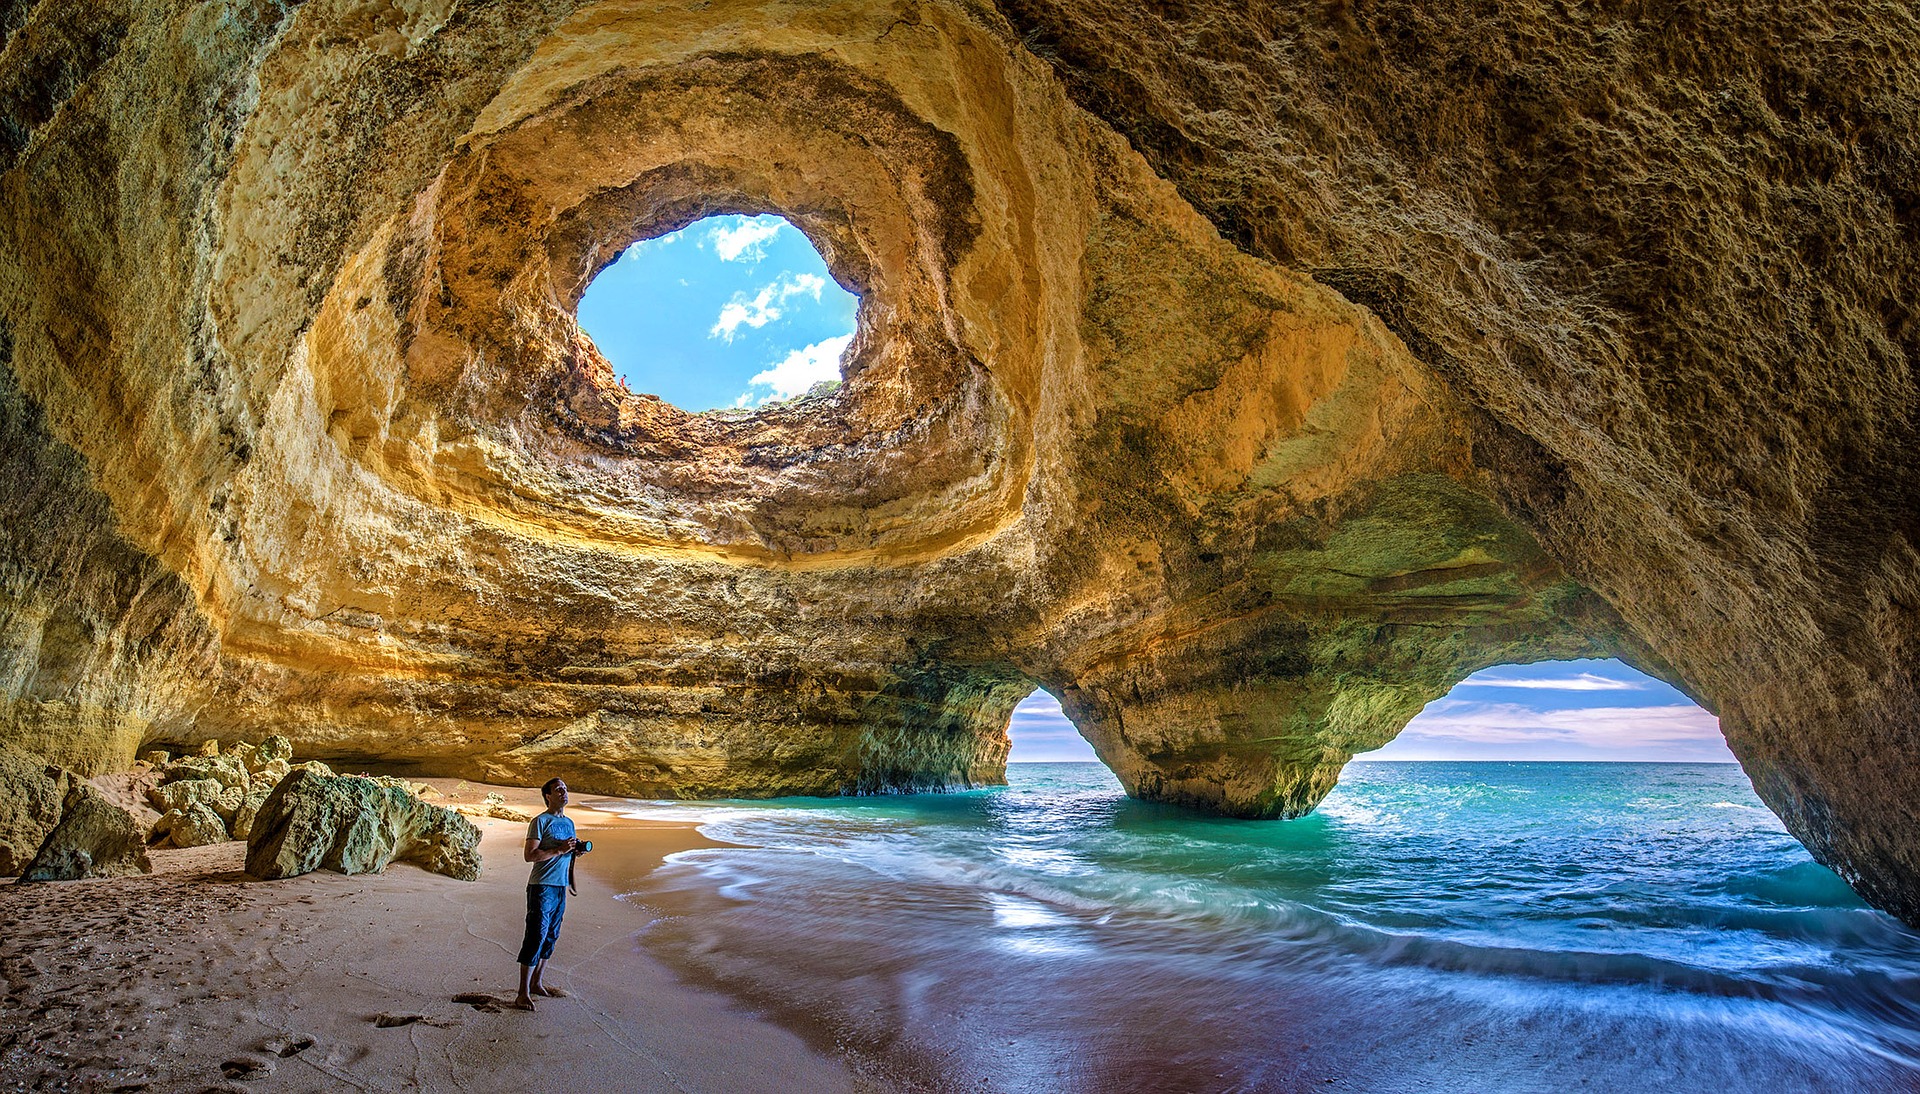 Caves in Portugal